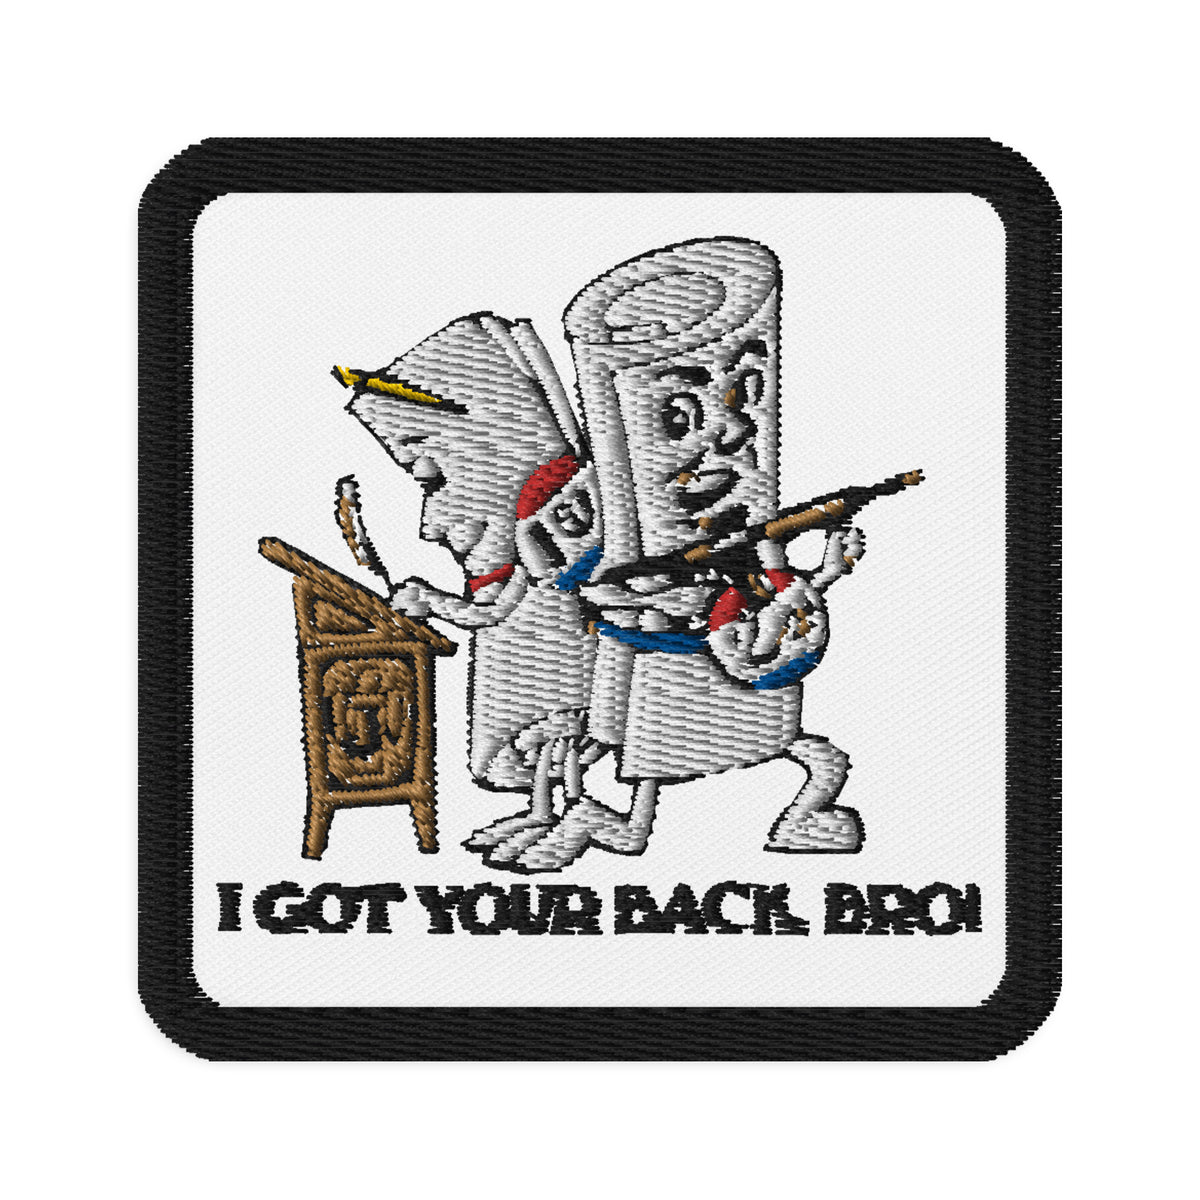 I Got Your Back Bro Patch